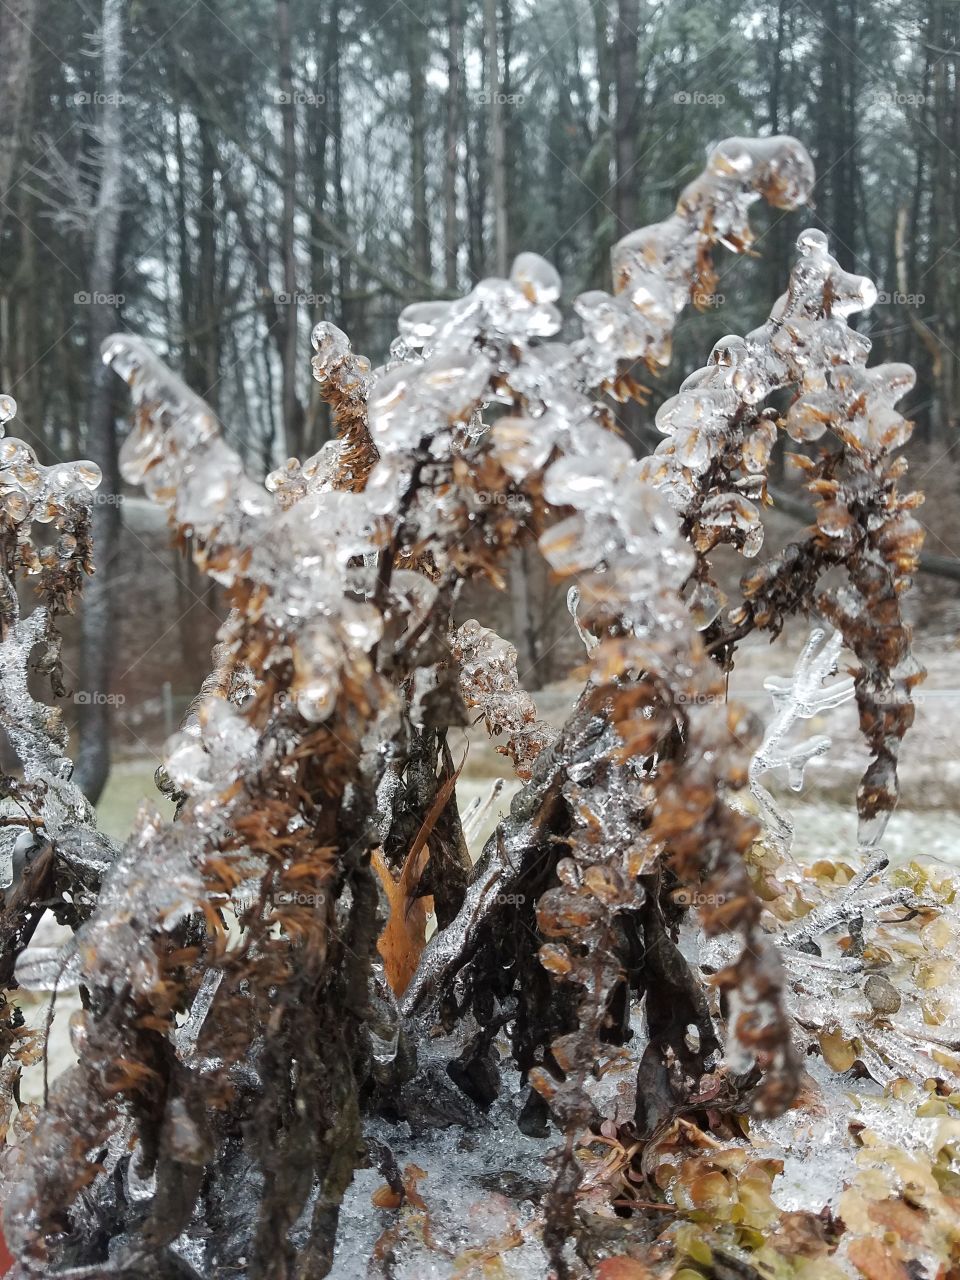 Winter Ice On A Plant